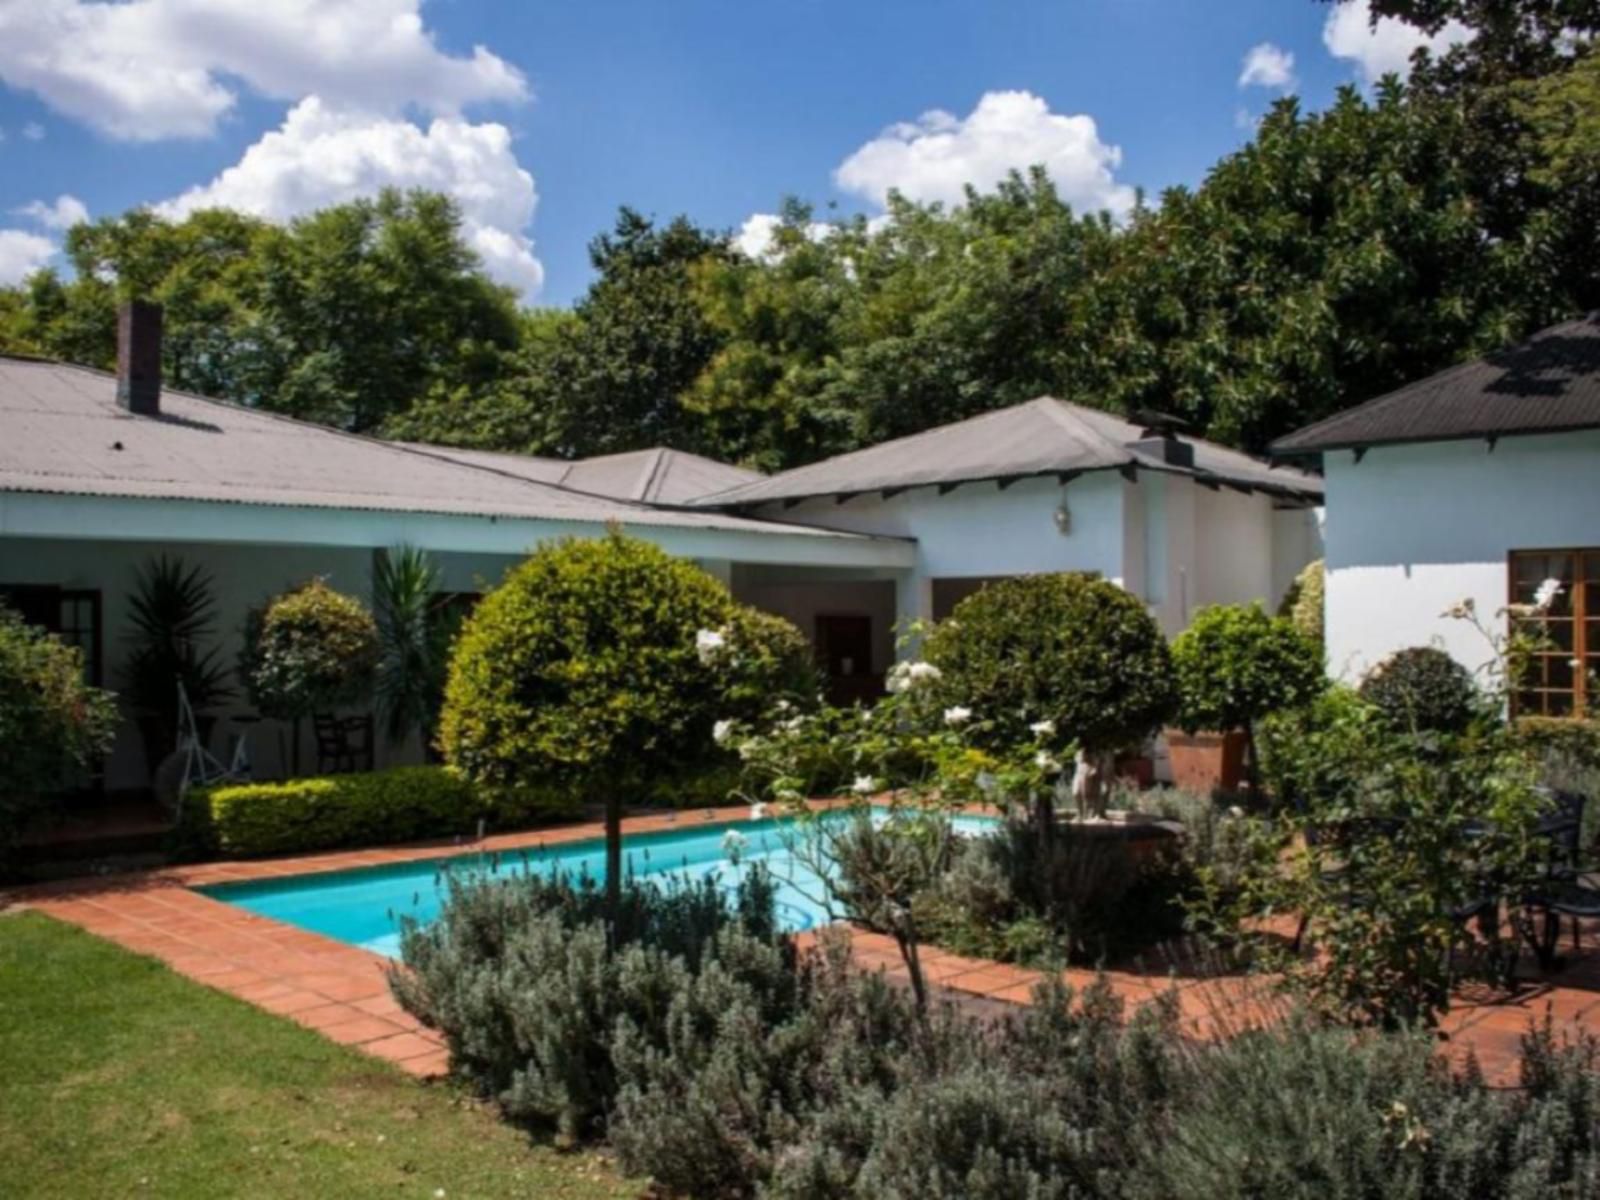 Brooks Cottage Brooklyn Pretoria Tshwane Gauteng South Africa House, Building, Architecture, Garden, Nature, Plant, Swimming Pool